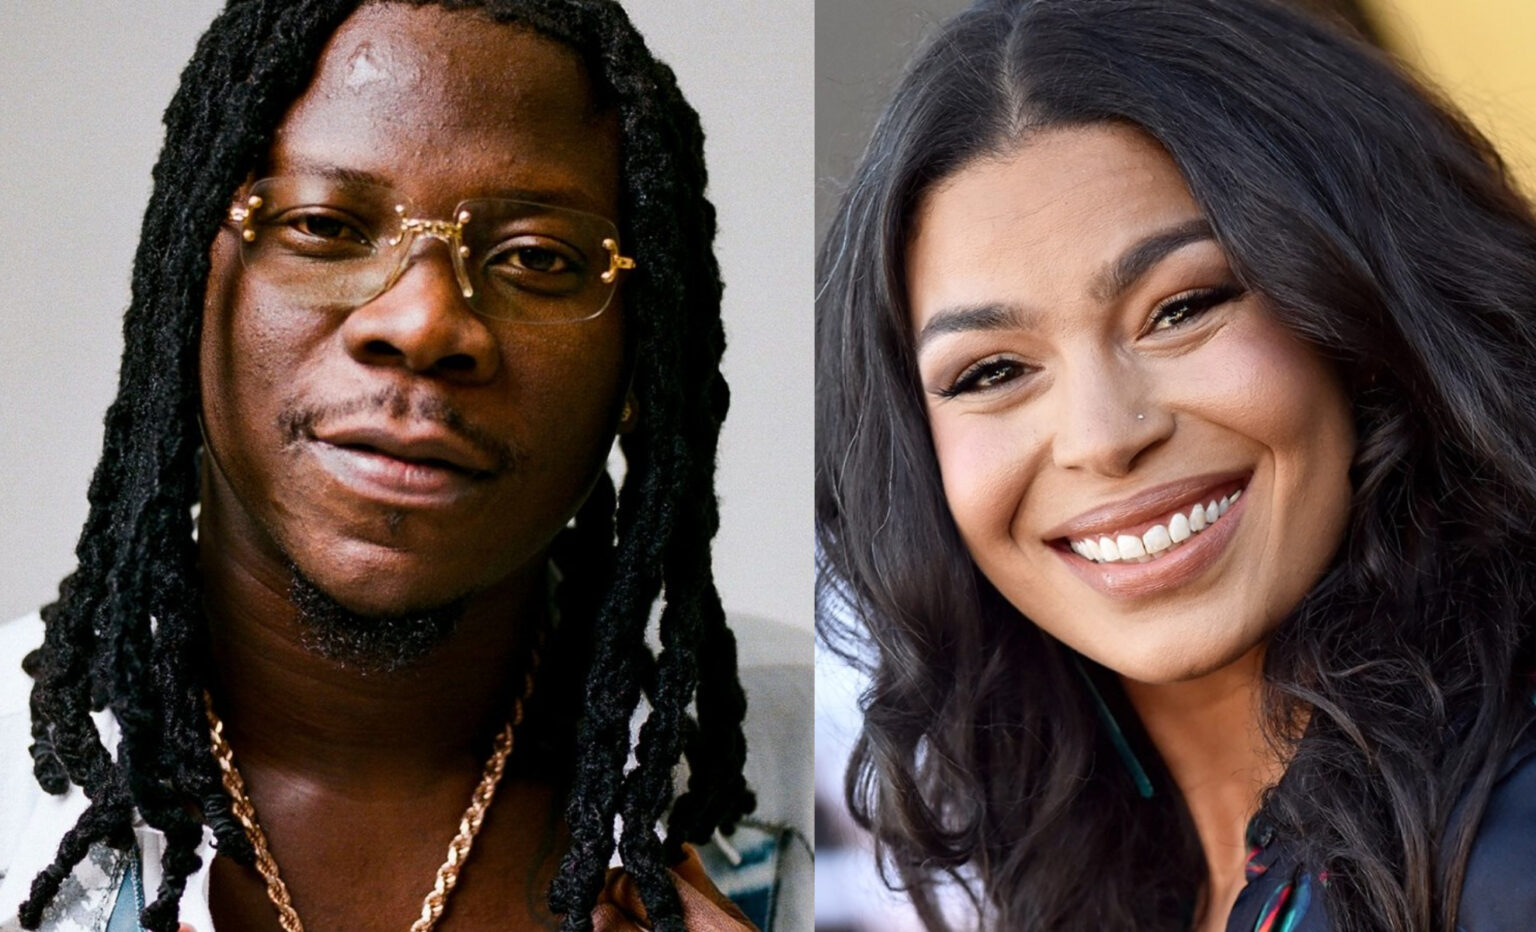 Stonebwoy hits the studio with American singer Jordin Sparks